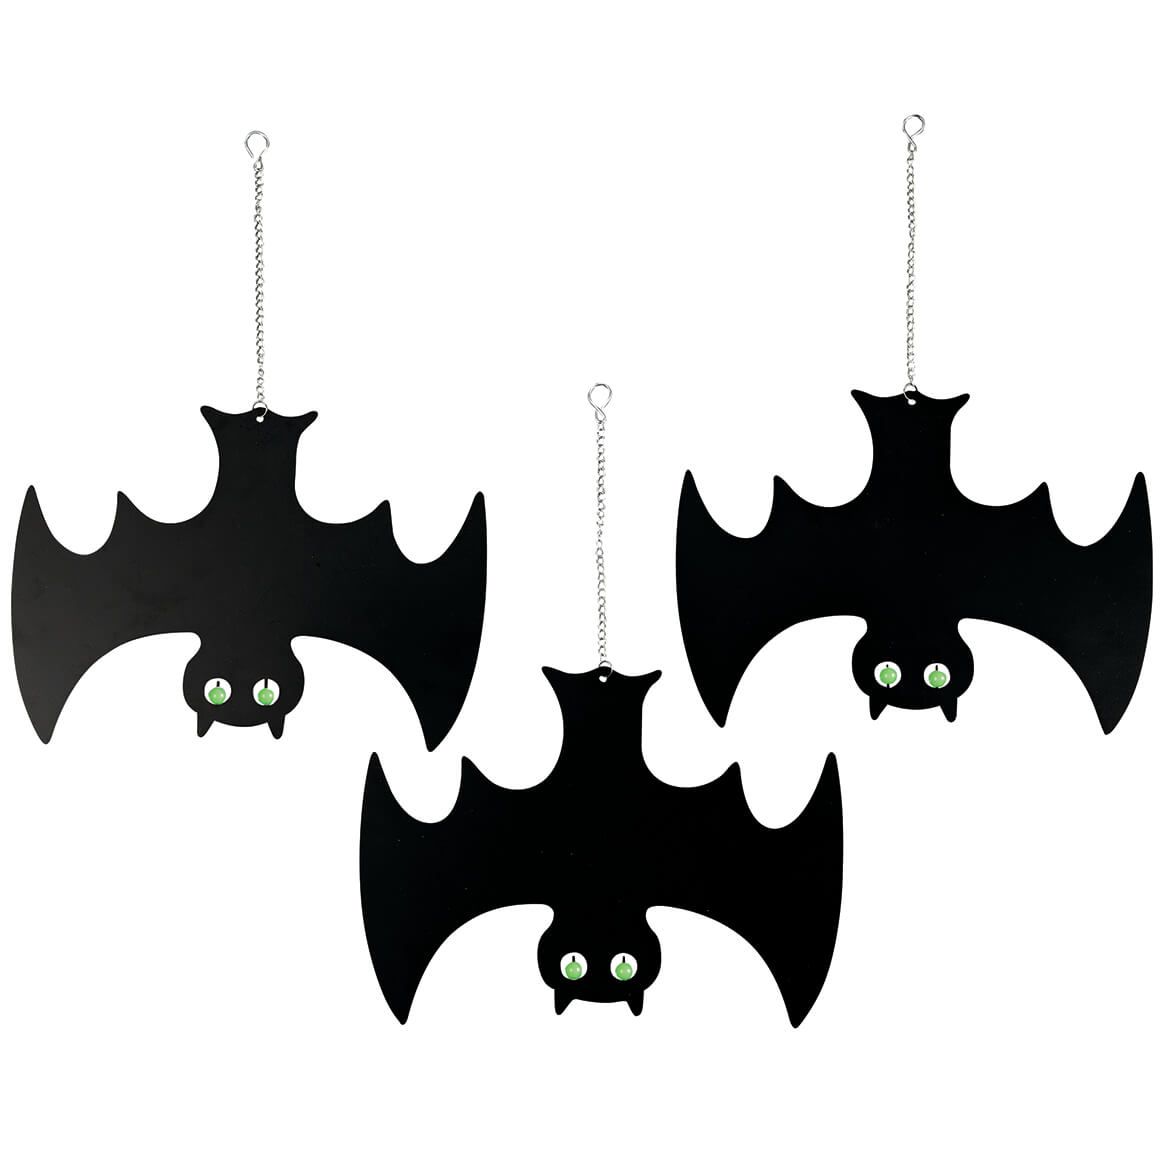 Glow-In-the-Dark Bats, Set of 3 by Fox River™ Creations + '-' + 375582